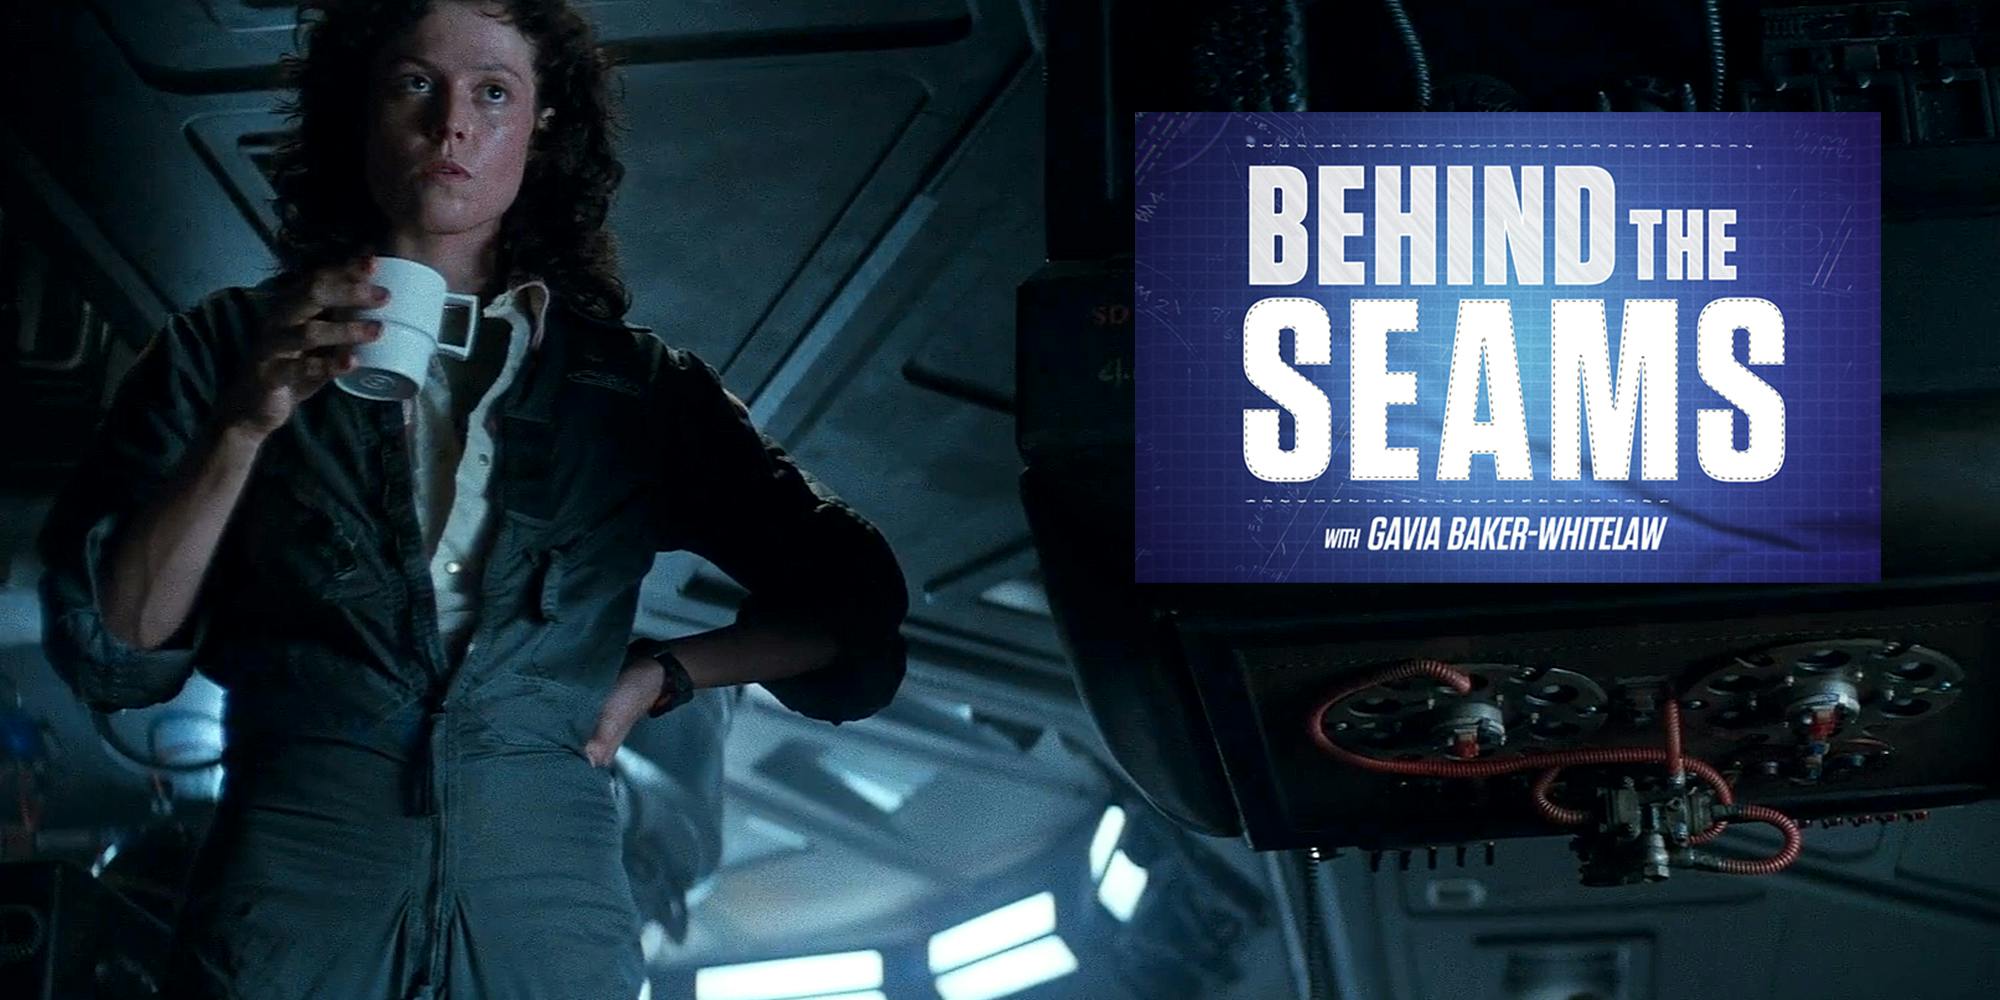 Behind the Seams with Gavia Baker-Whitelaw, over Ripley from Alien holding coffee mug